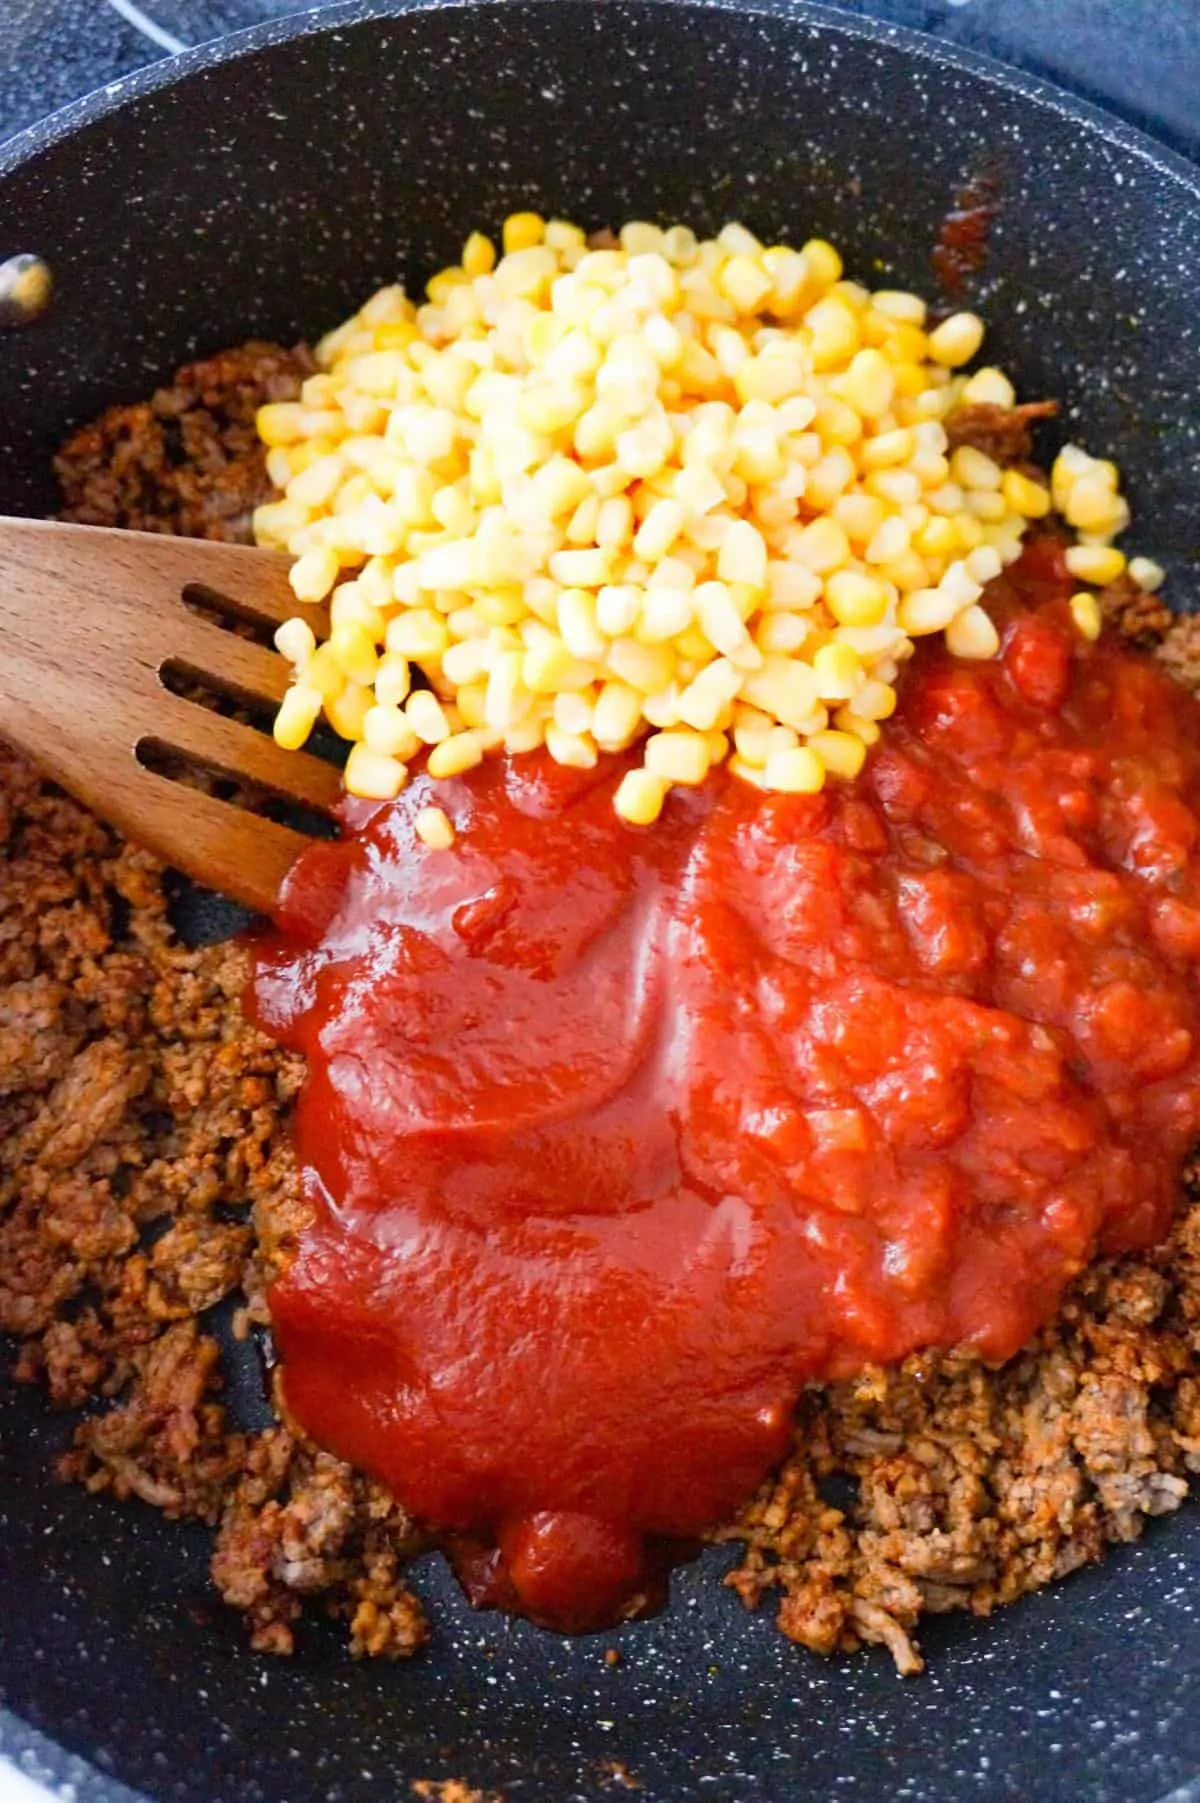 corn, Heinz chili sauce and chunky salsa on top of cooked ground beef in a saute pan